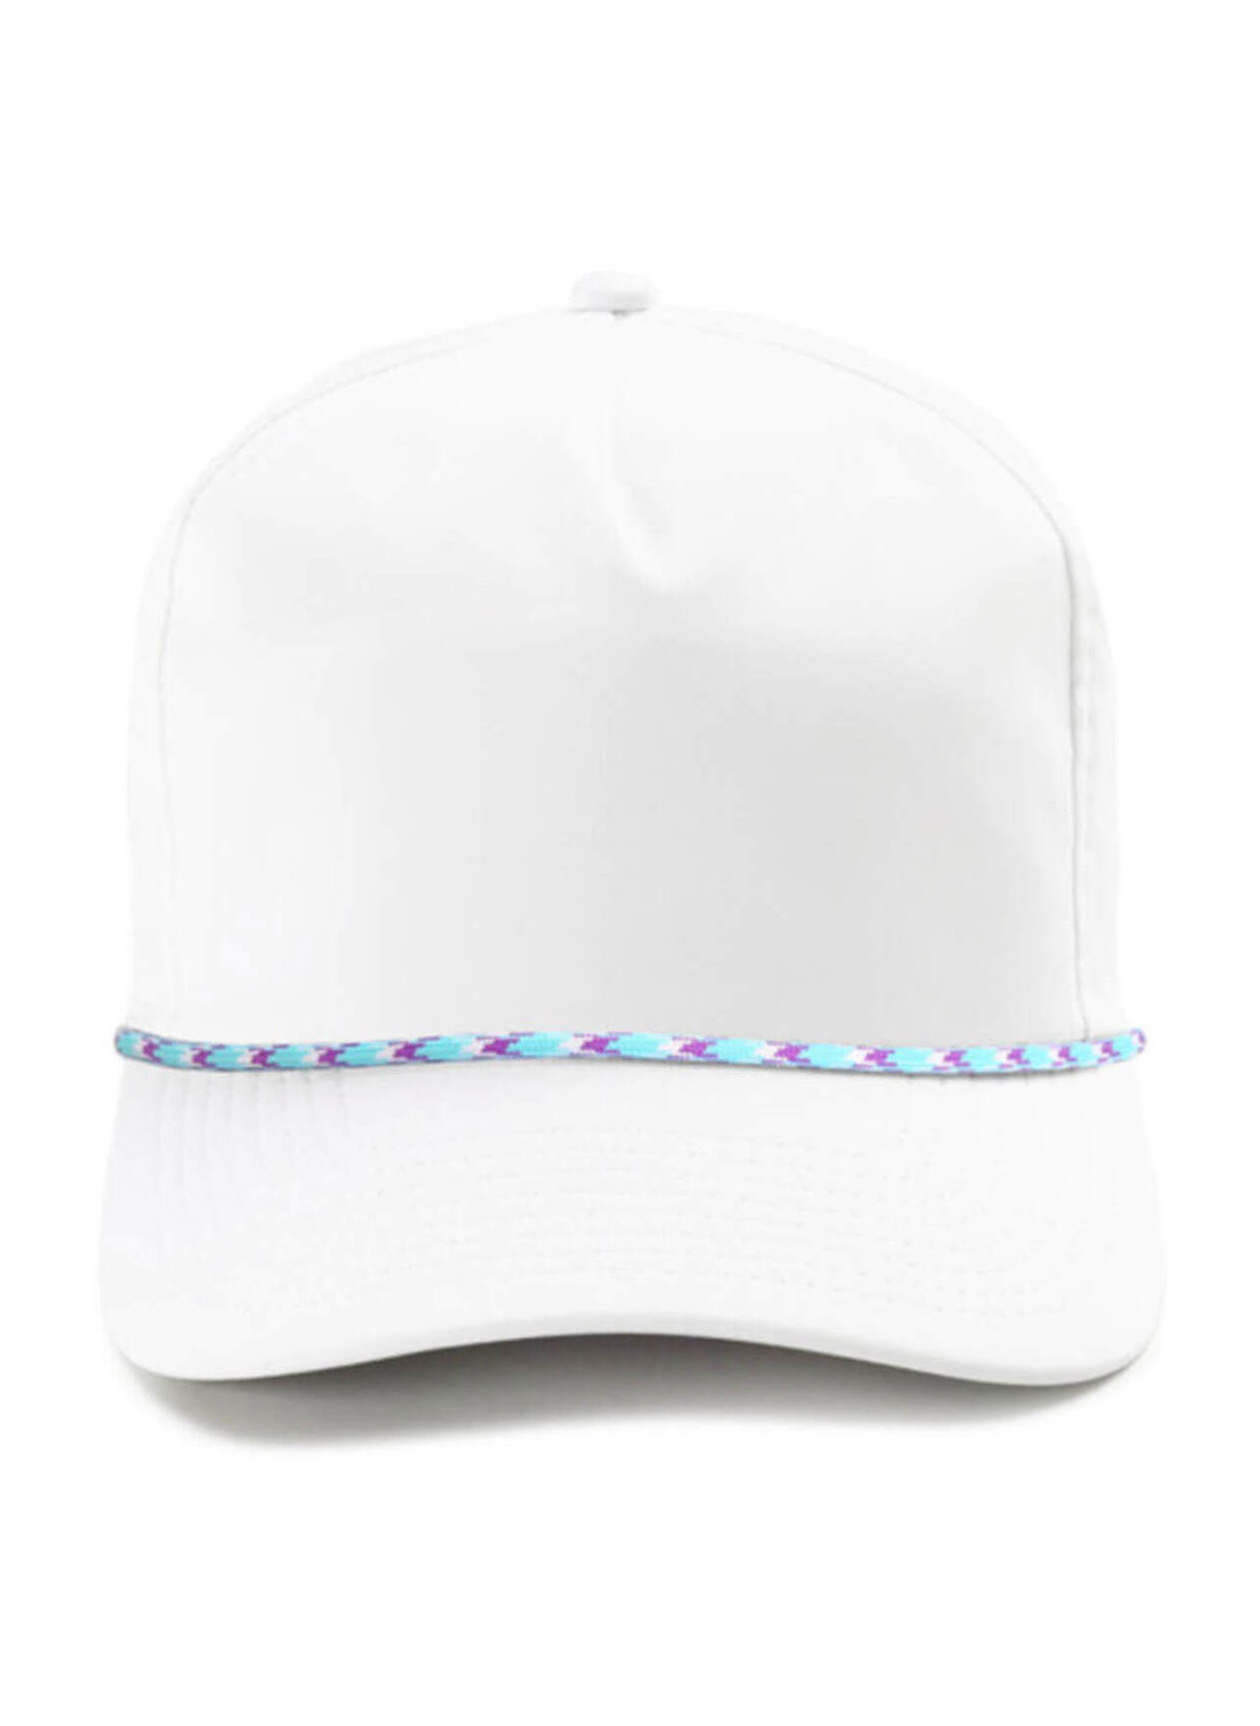 Imperial White / Teal And Purple The Wrightson Performance Rope Hat